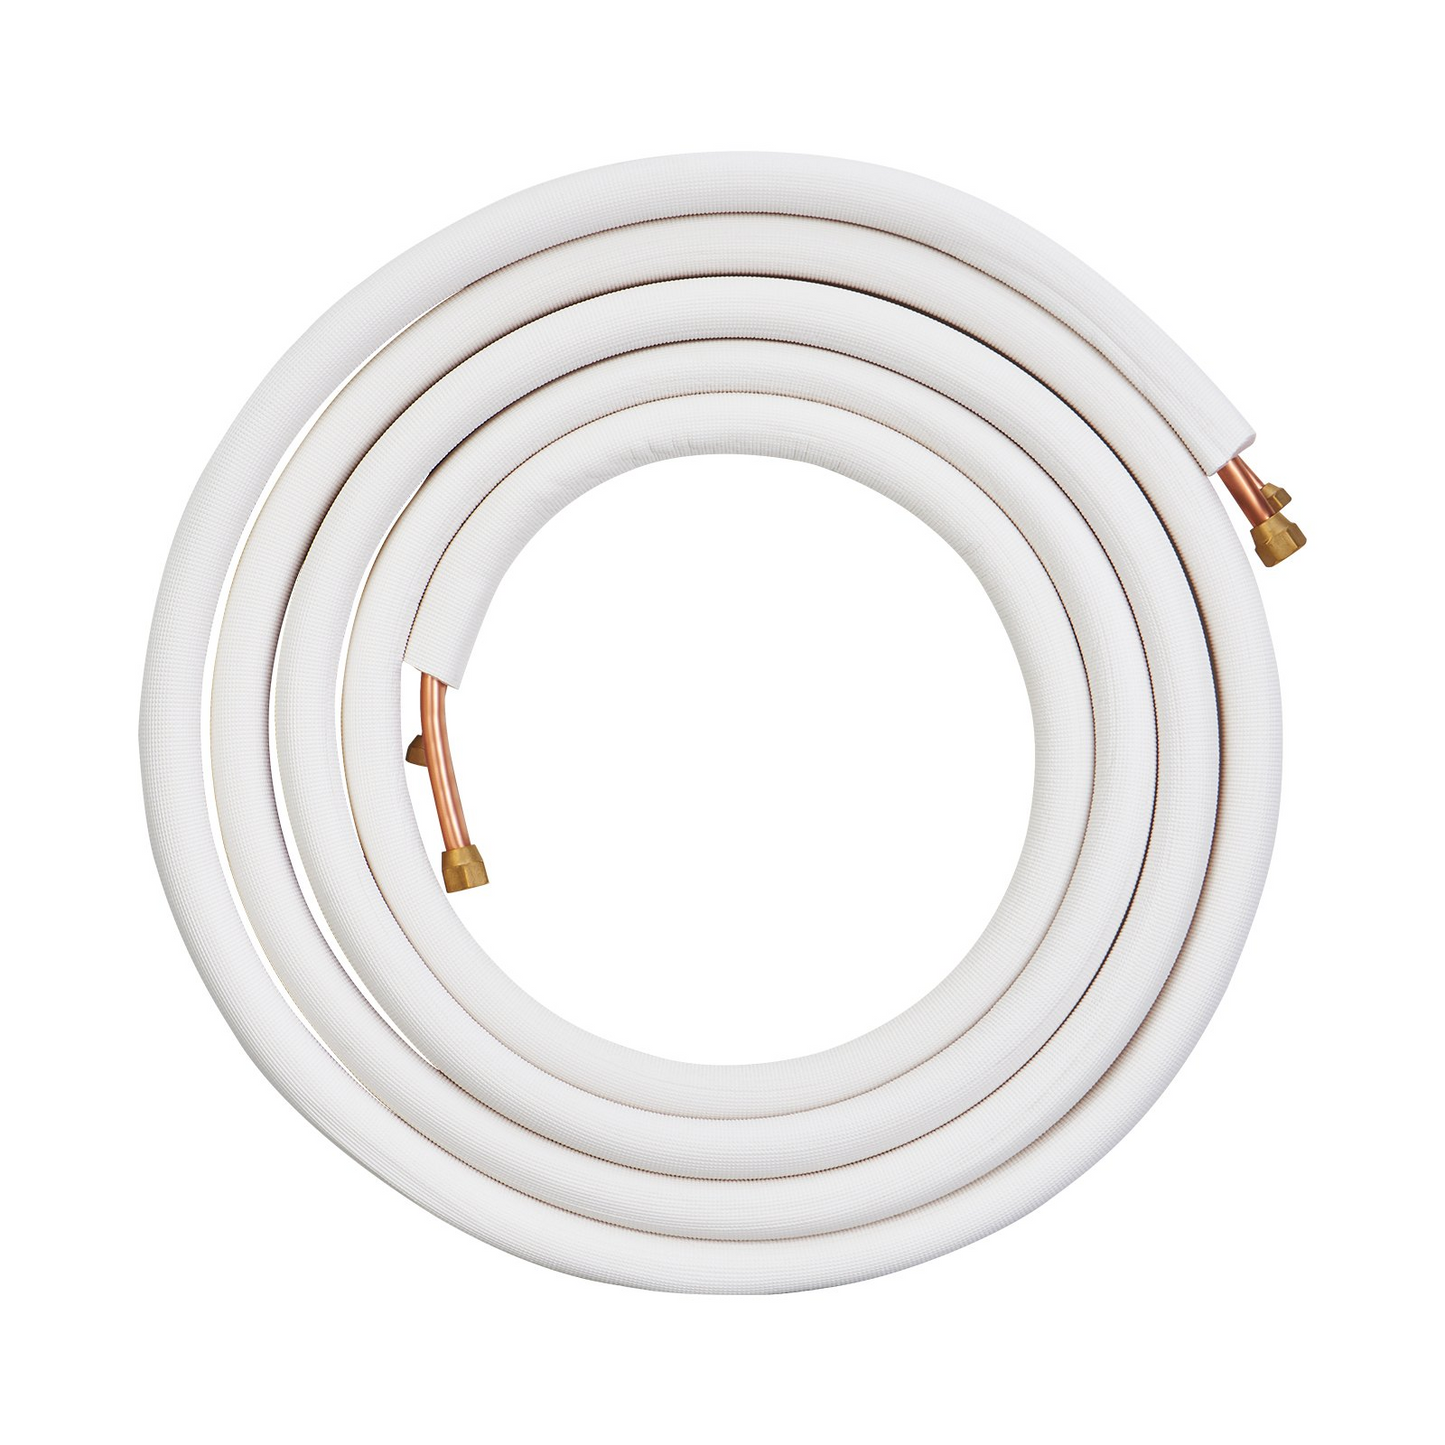 VEVOR 25FT Mini Split Line Set, 3/8" & 5/8" O.D Copper Pipes Tubing and Triple-Layer Insulation, for Mini Split Air Conditioning Refrigerant or Heating Pump Equipment & HVAC with Wrapping Strips., Goodies N Stuff